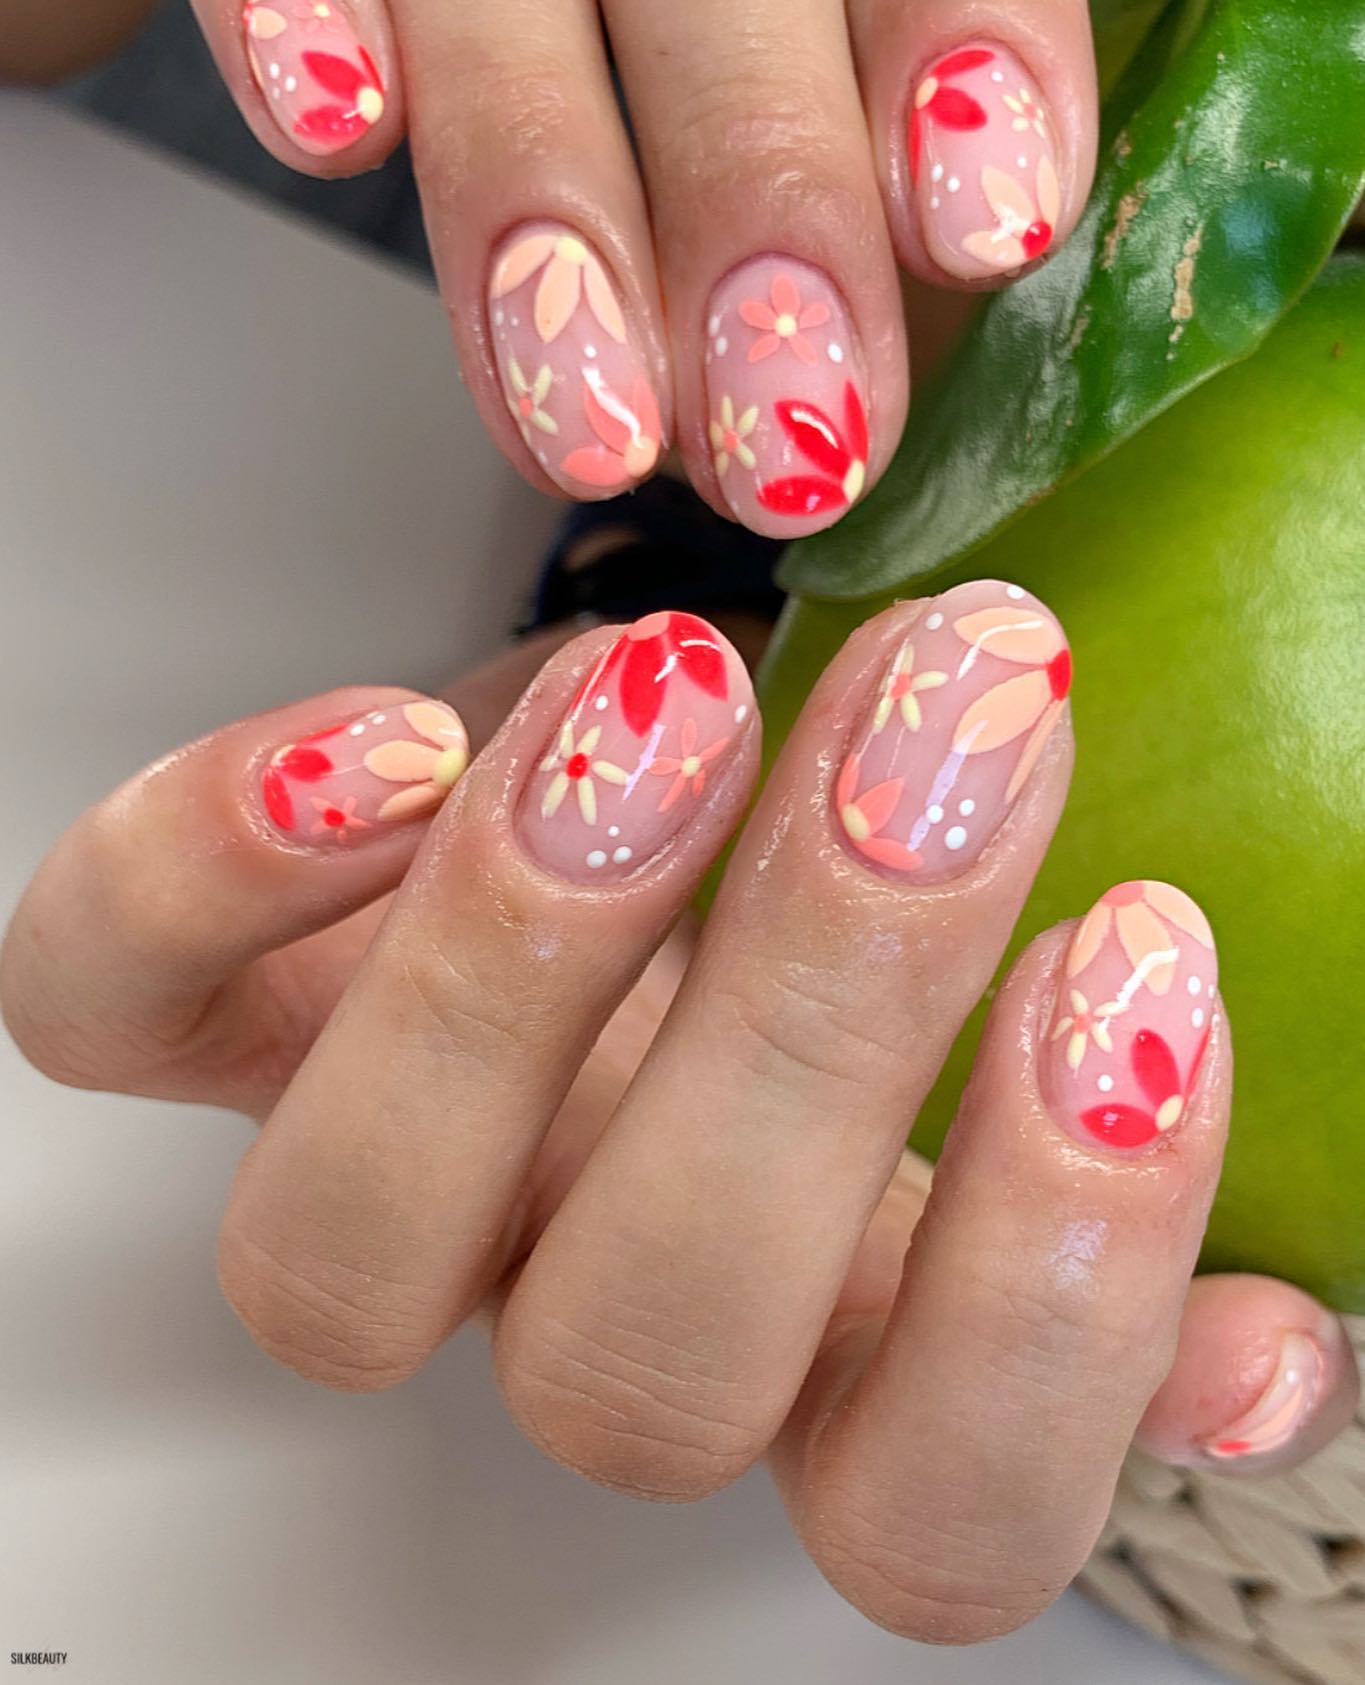 There are different shades of peach colors and all of them are beautiful. If you can't choose one color to draw a daisy, then let's mix three of them in one nail art.